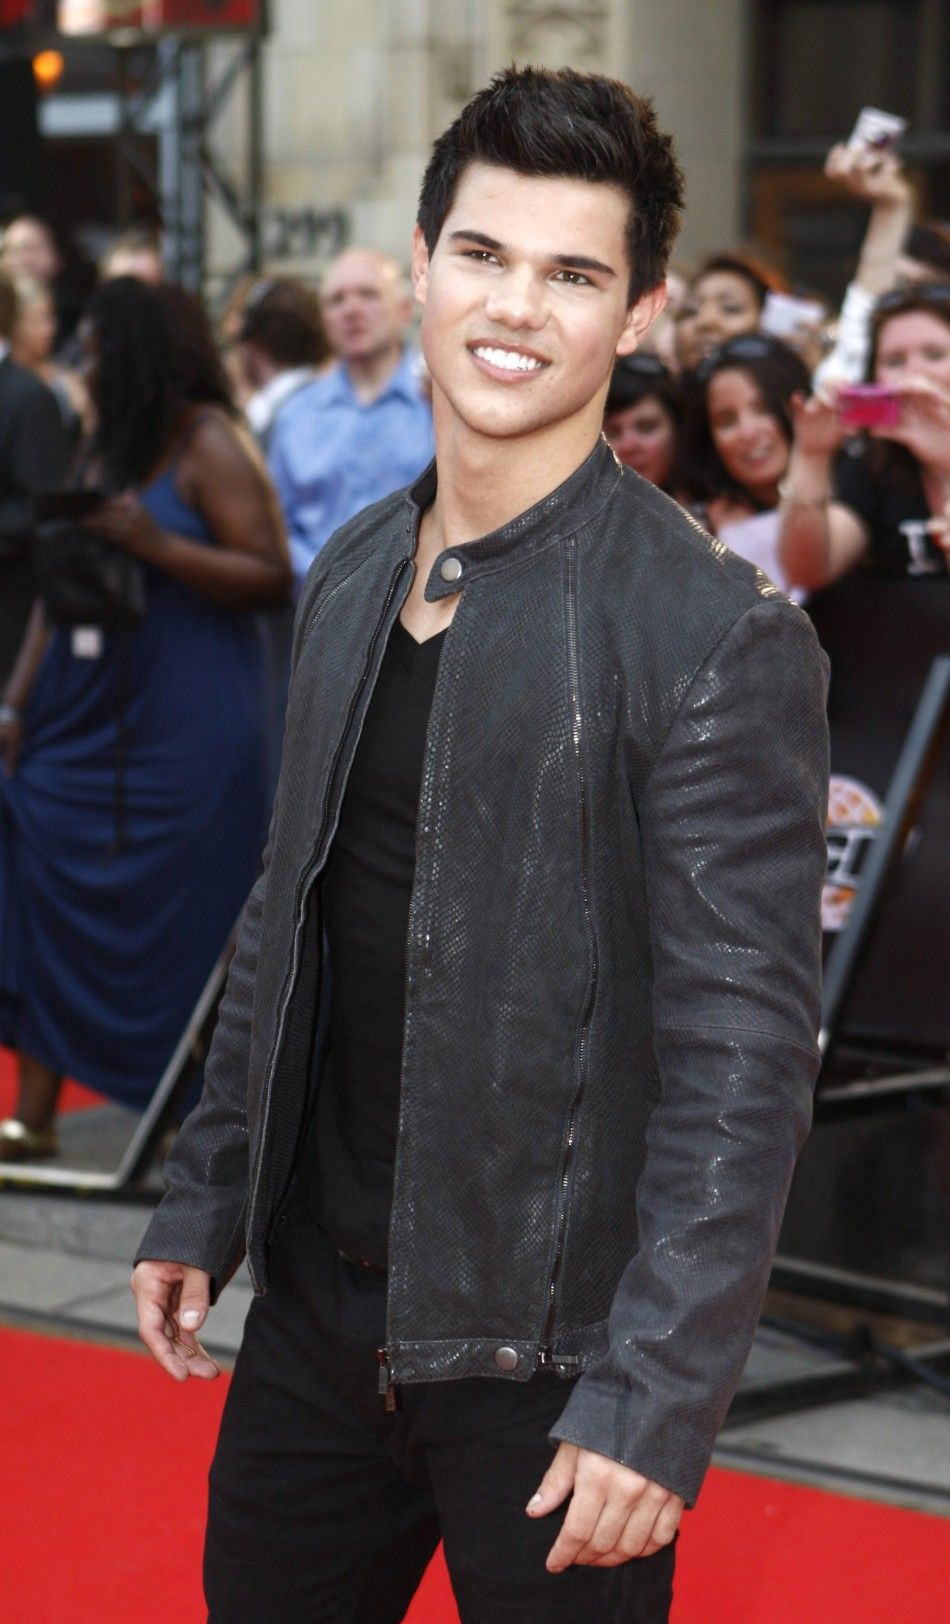 Taylor Lautner from the film quotTwilight, New Moonquot poses during the 2009 MuchMusic Video Awards in Toronto